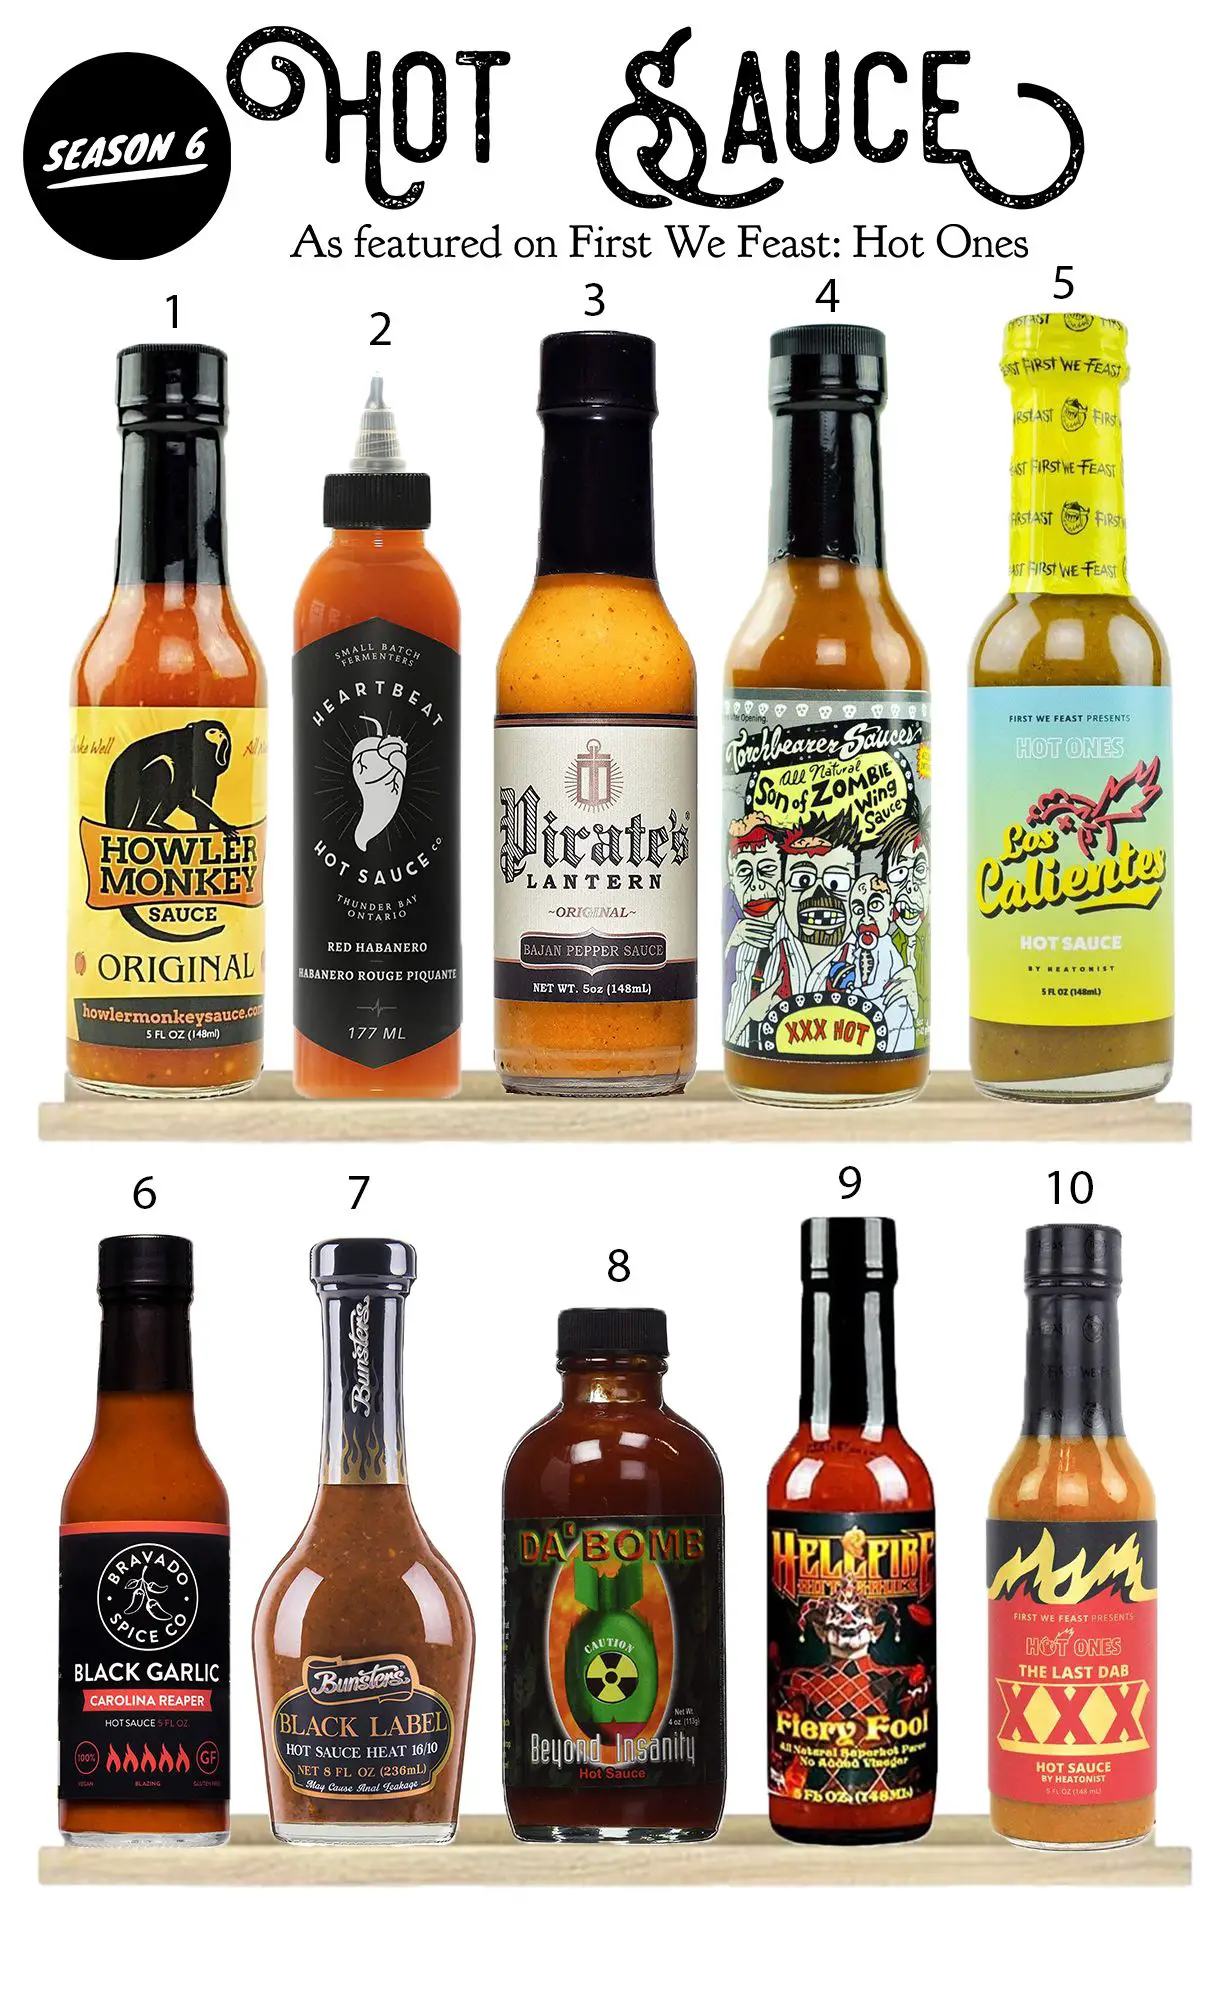 Hot sauces as featured on First We Feast: Hot Ones (Season 6). # ...